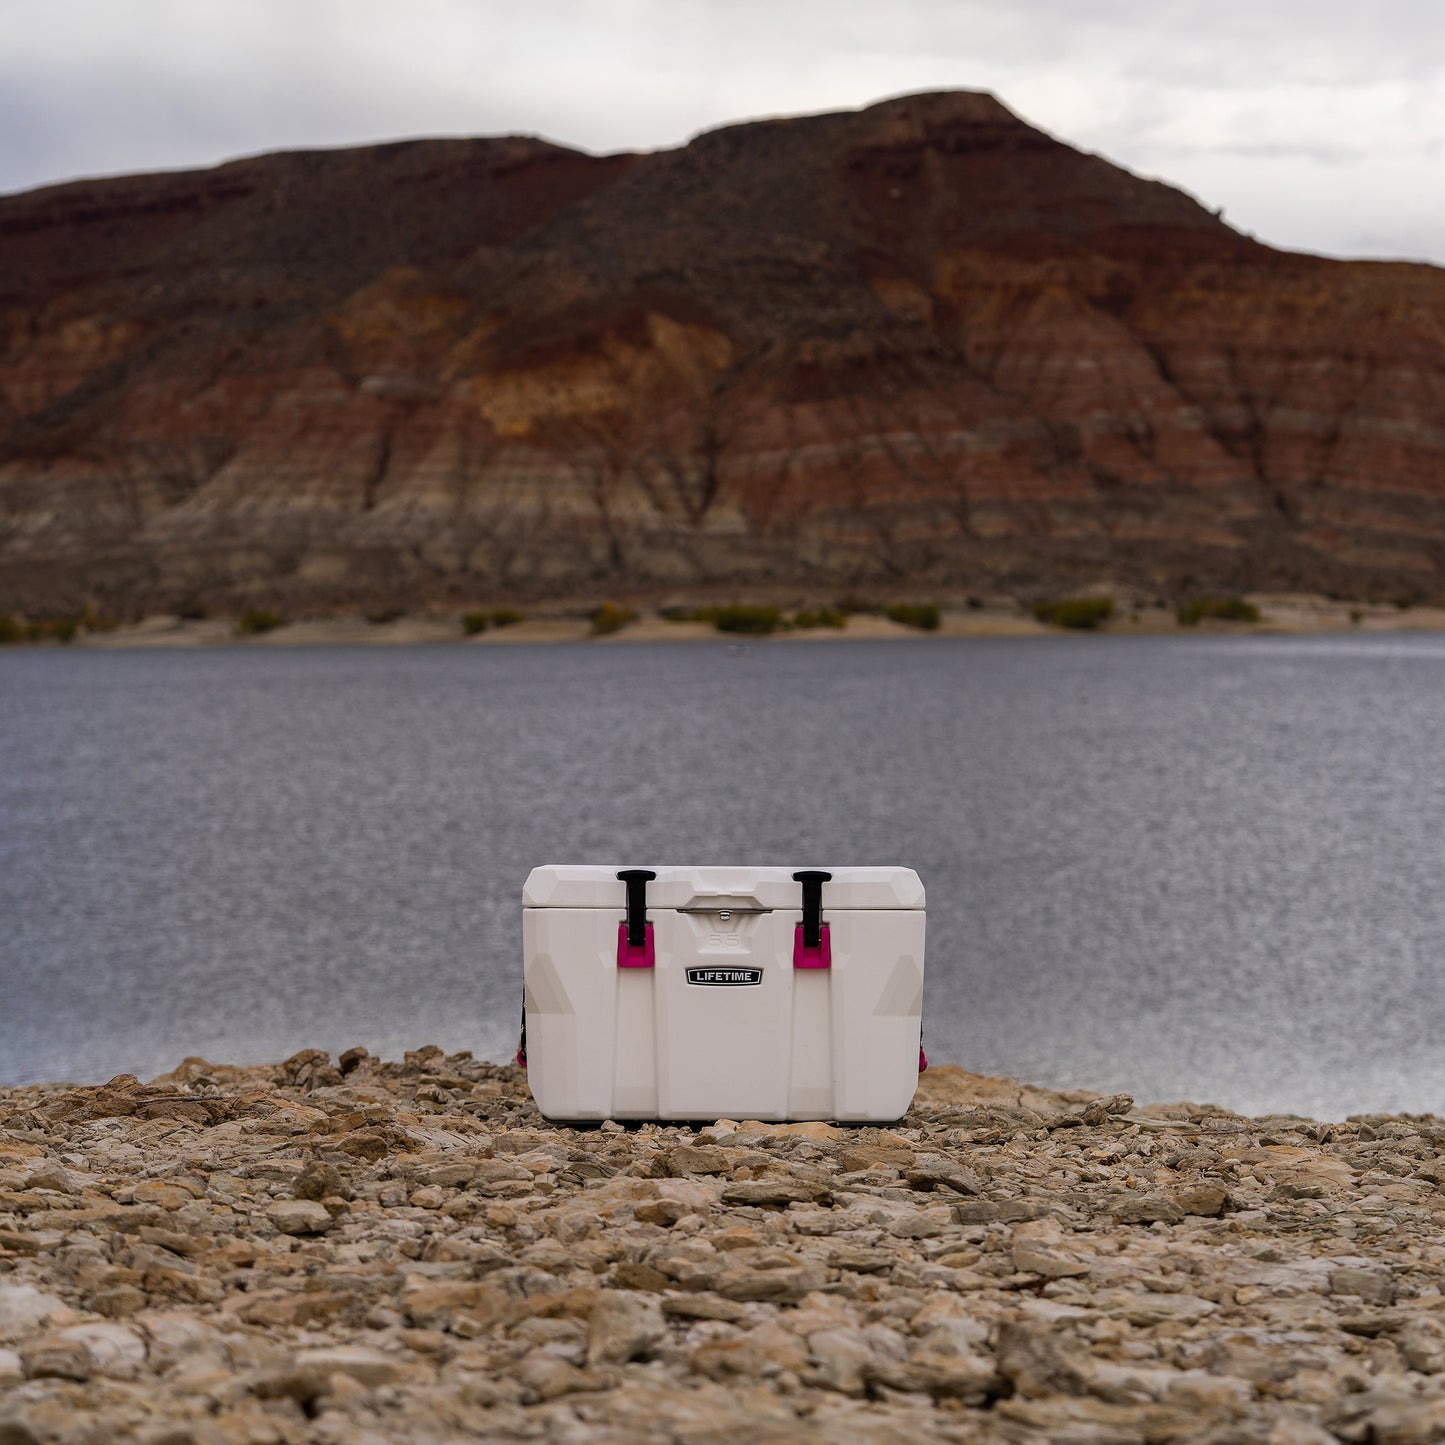 Cooler 55 Quart Wasatch White and Pink